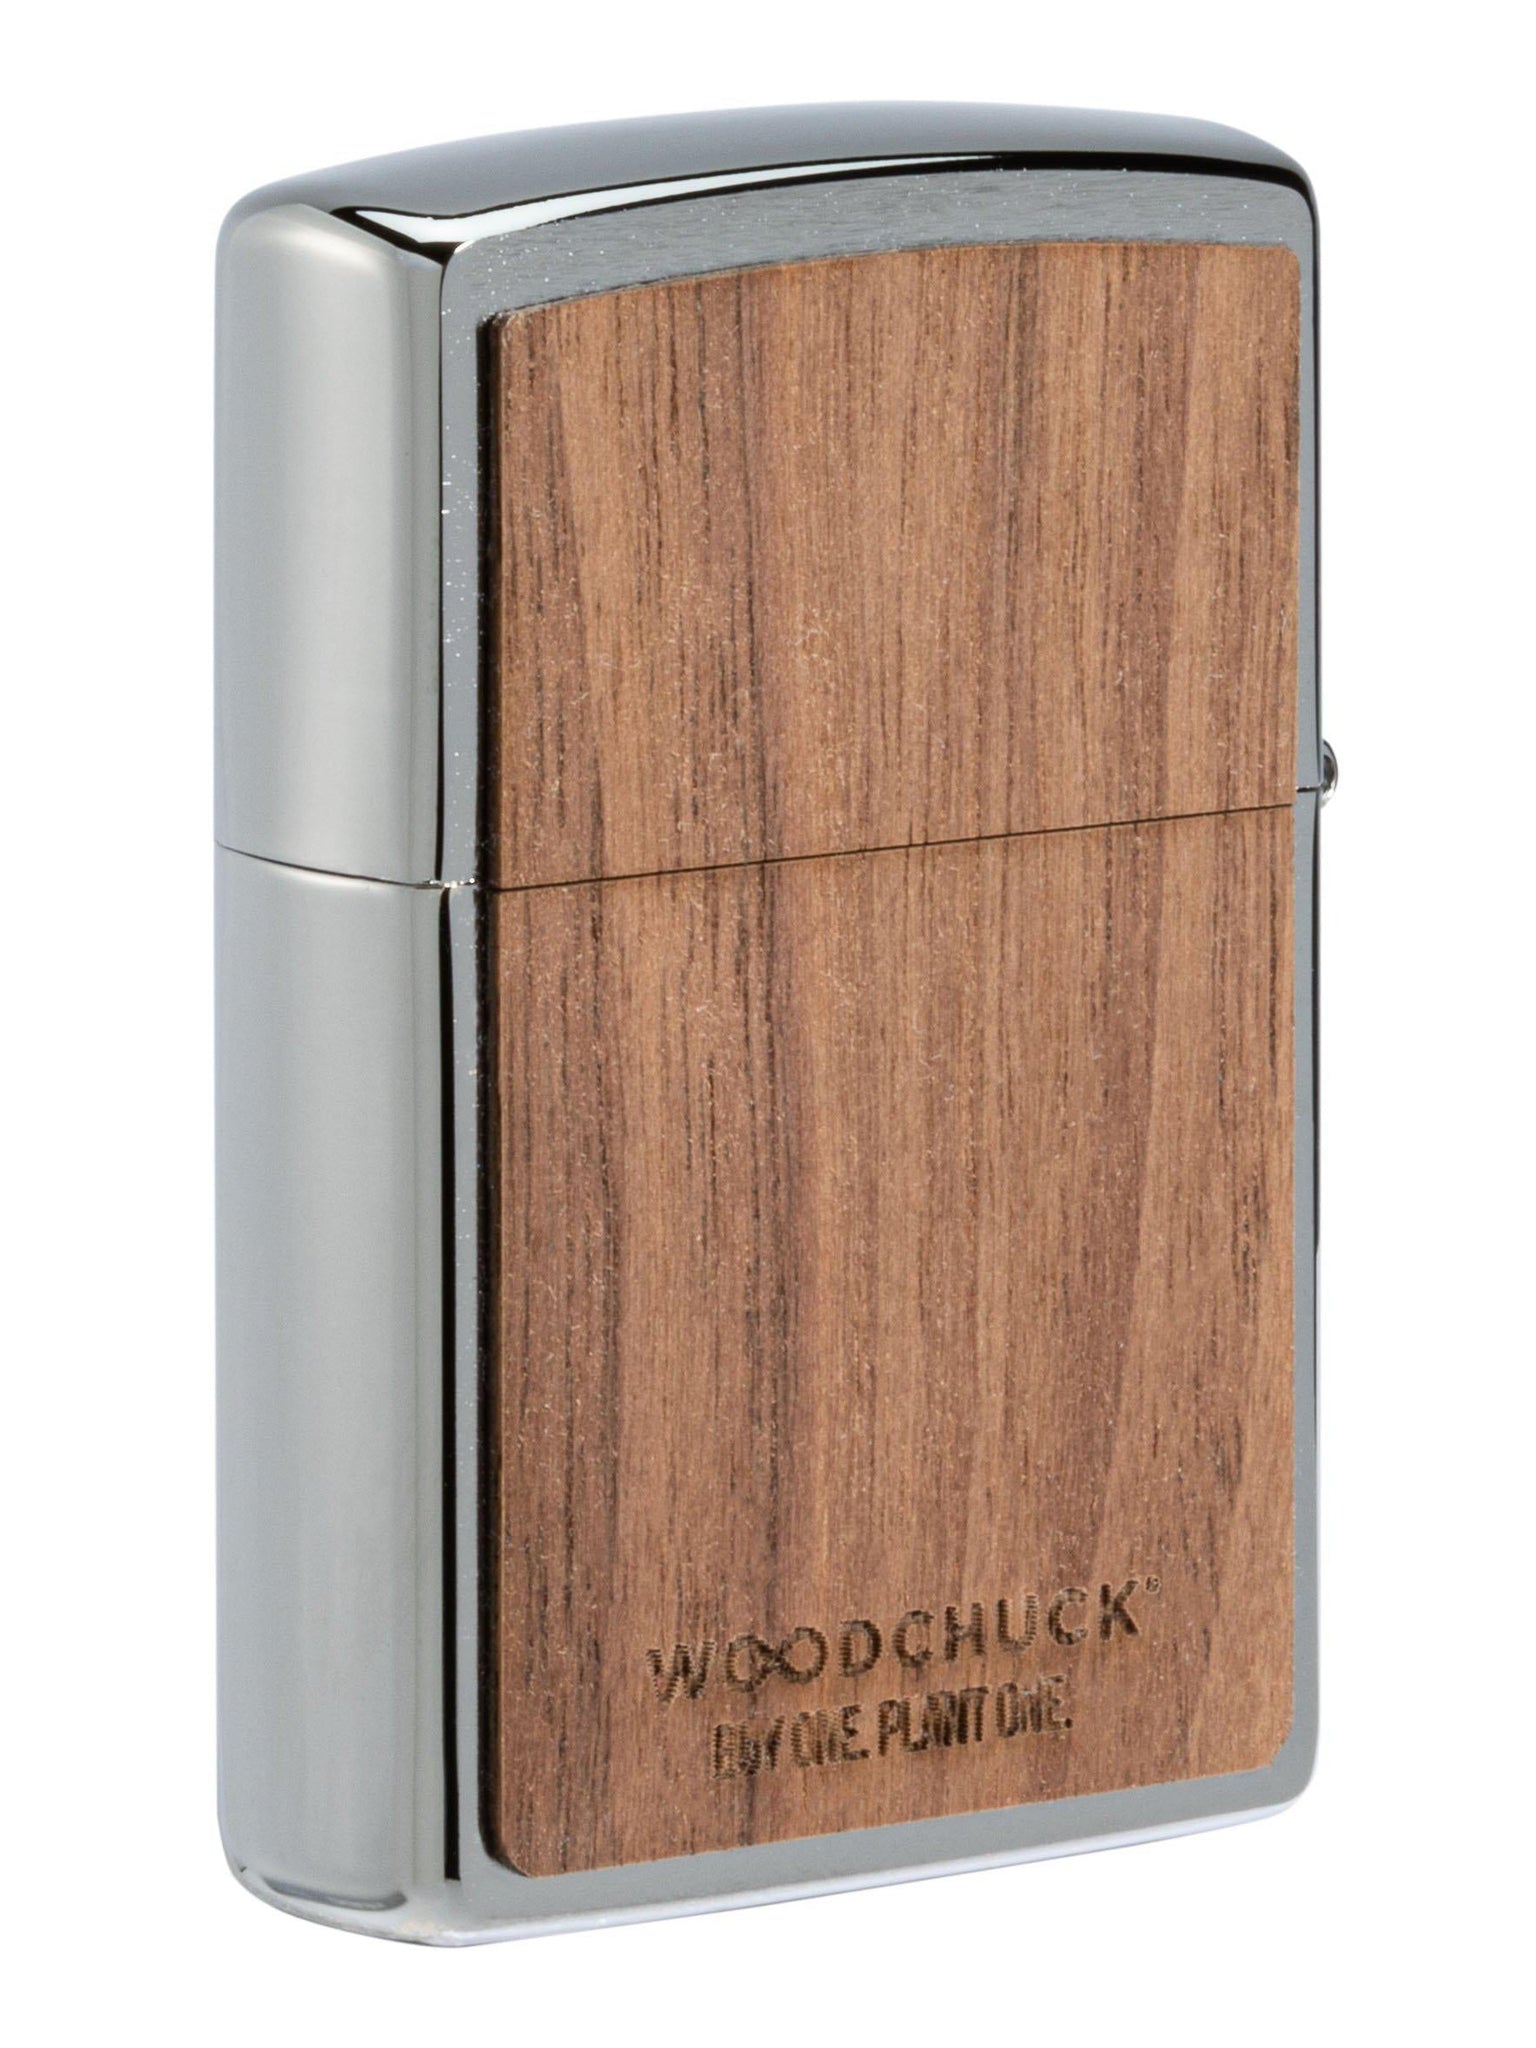 Zippo Lighter: Woodchuck Walnut with Leaves - Brushed Chrome 49708